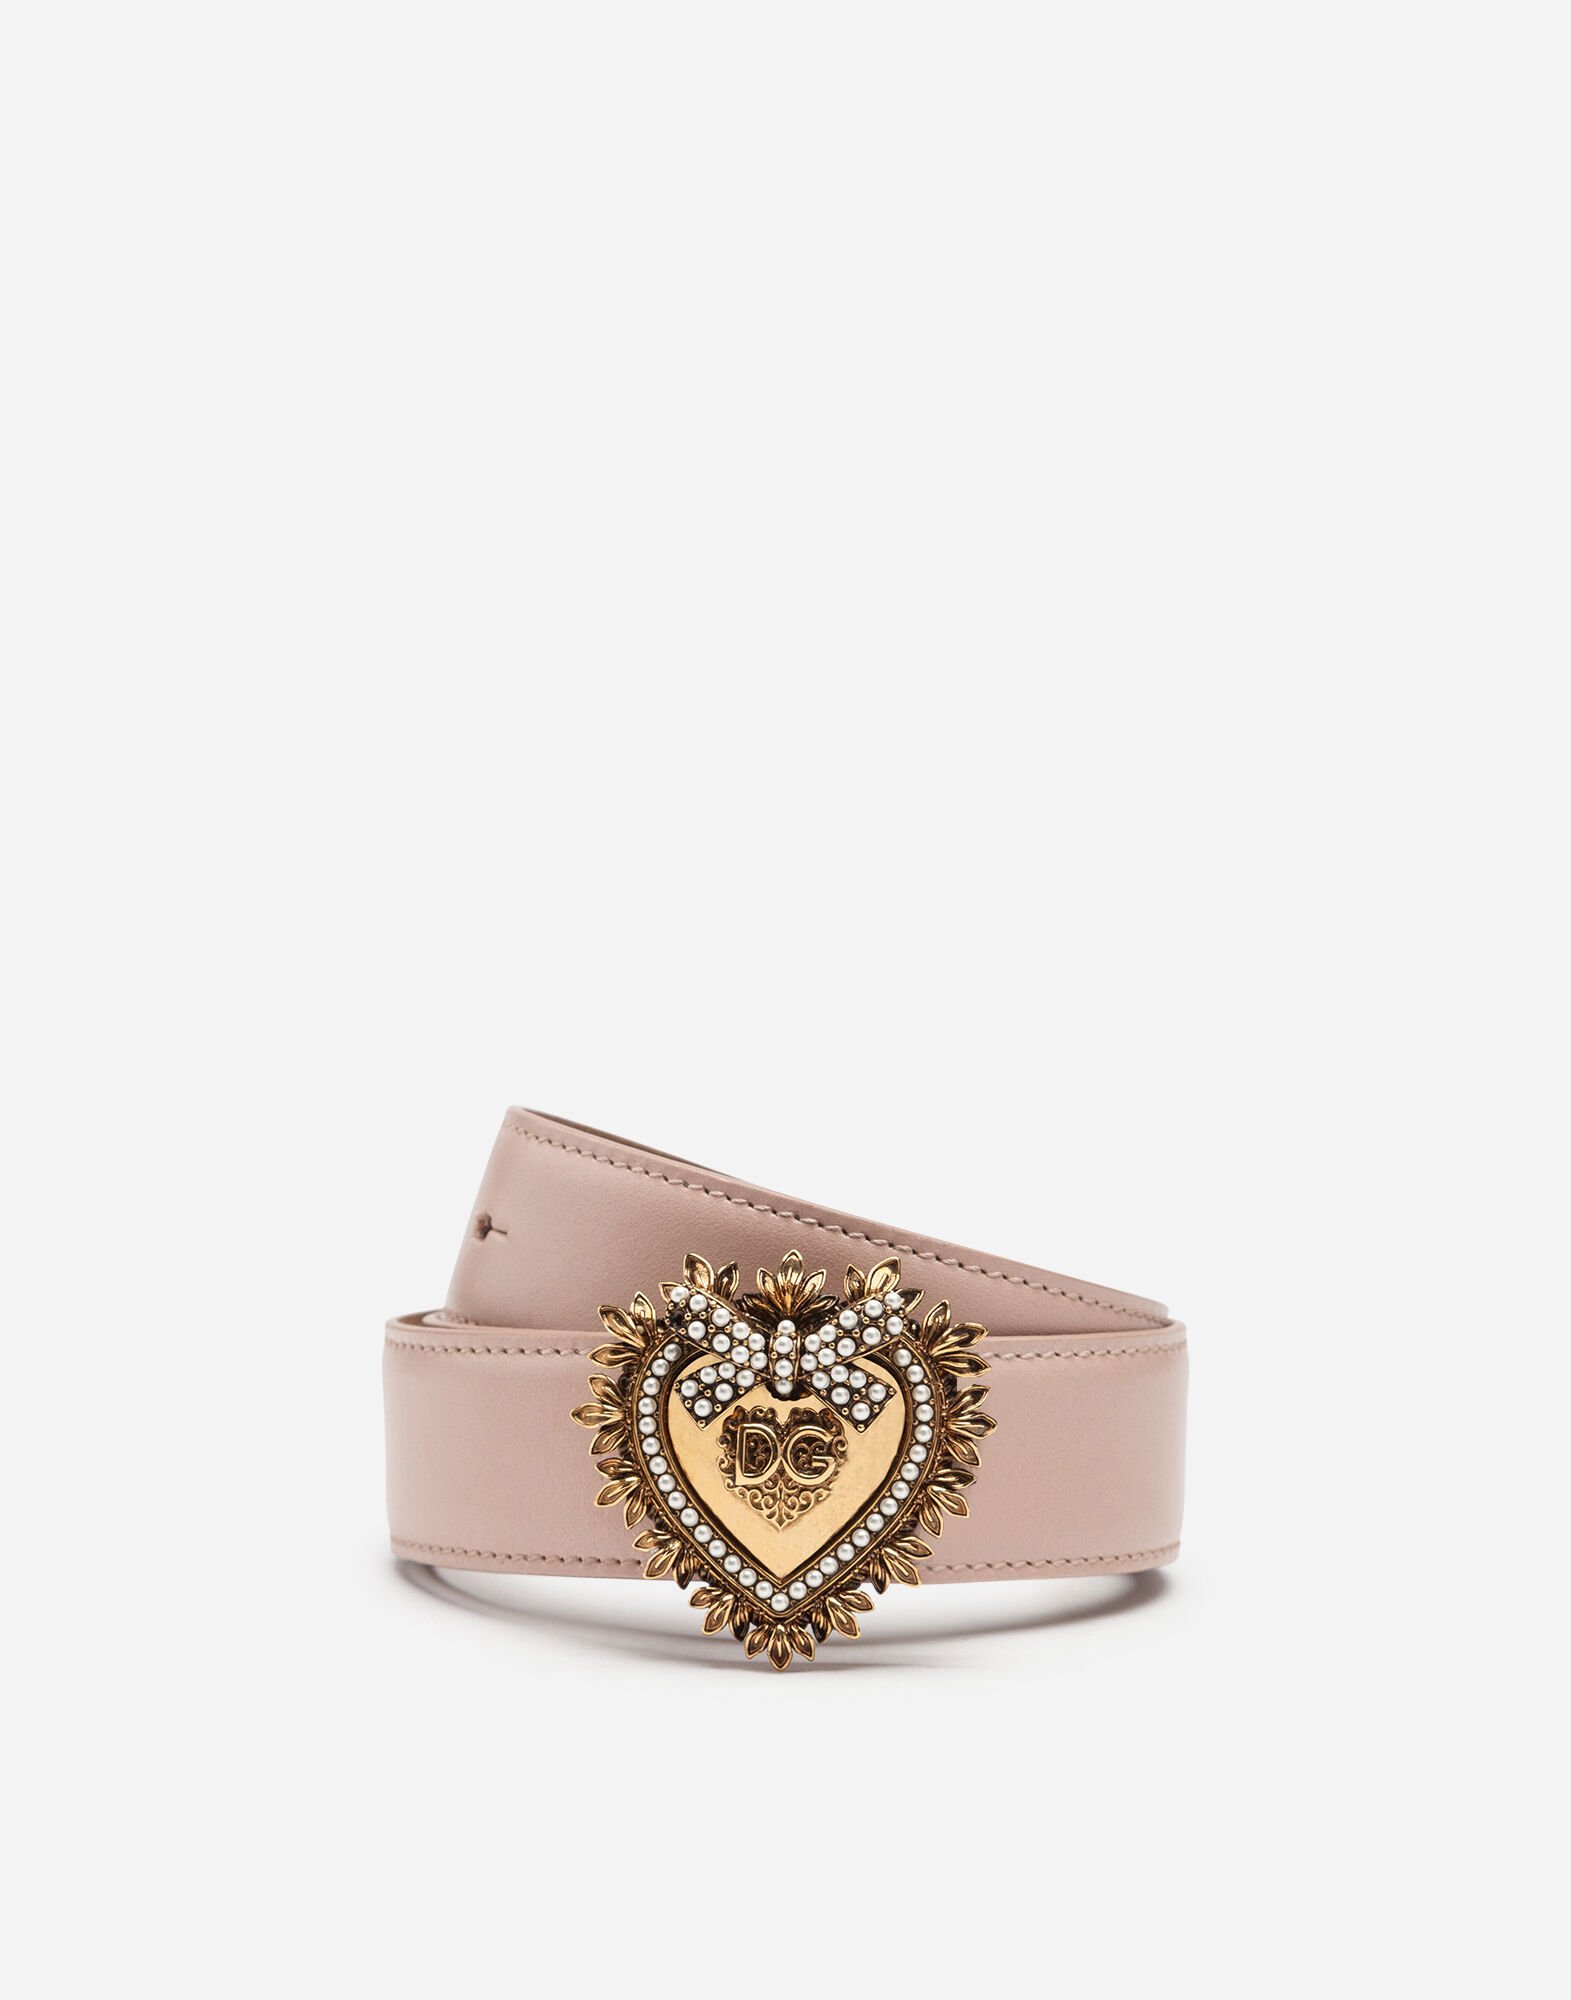 Dolce & Gabbana Devotion belt in lux leather Pink BE1636AW576